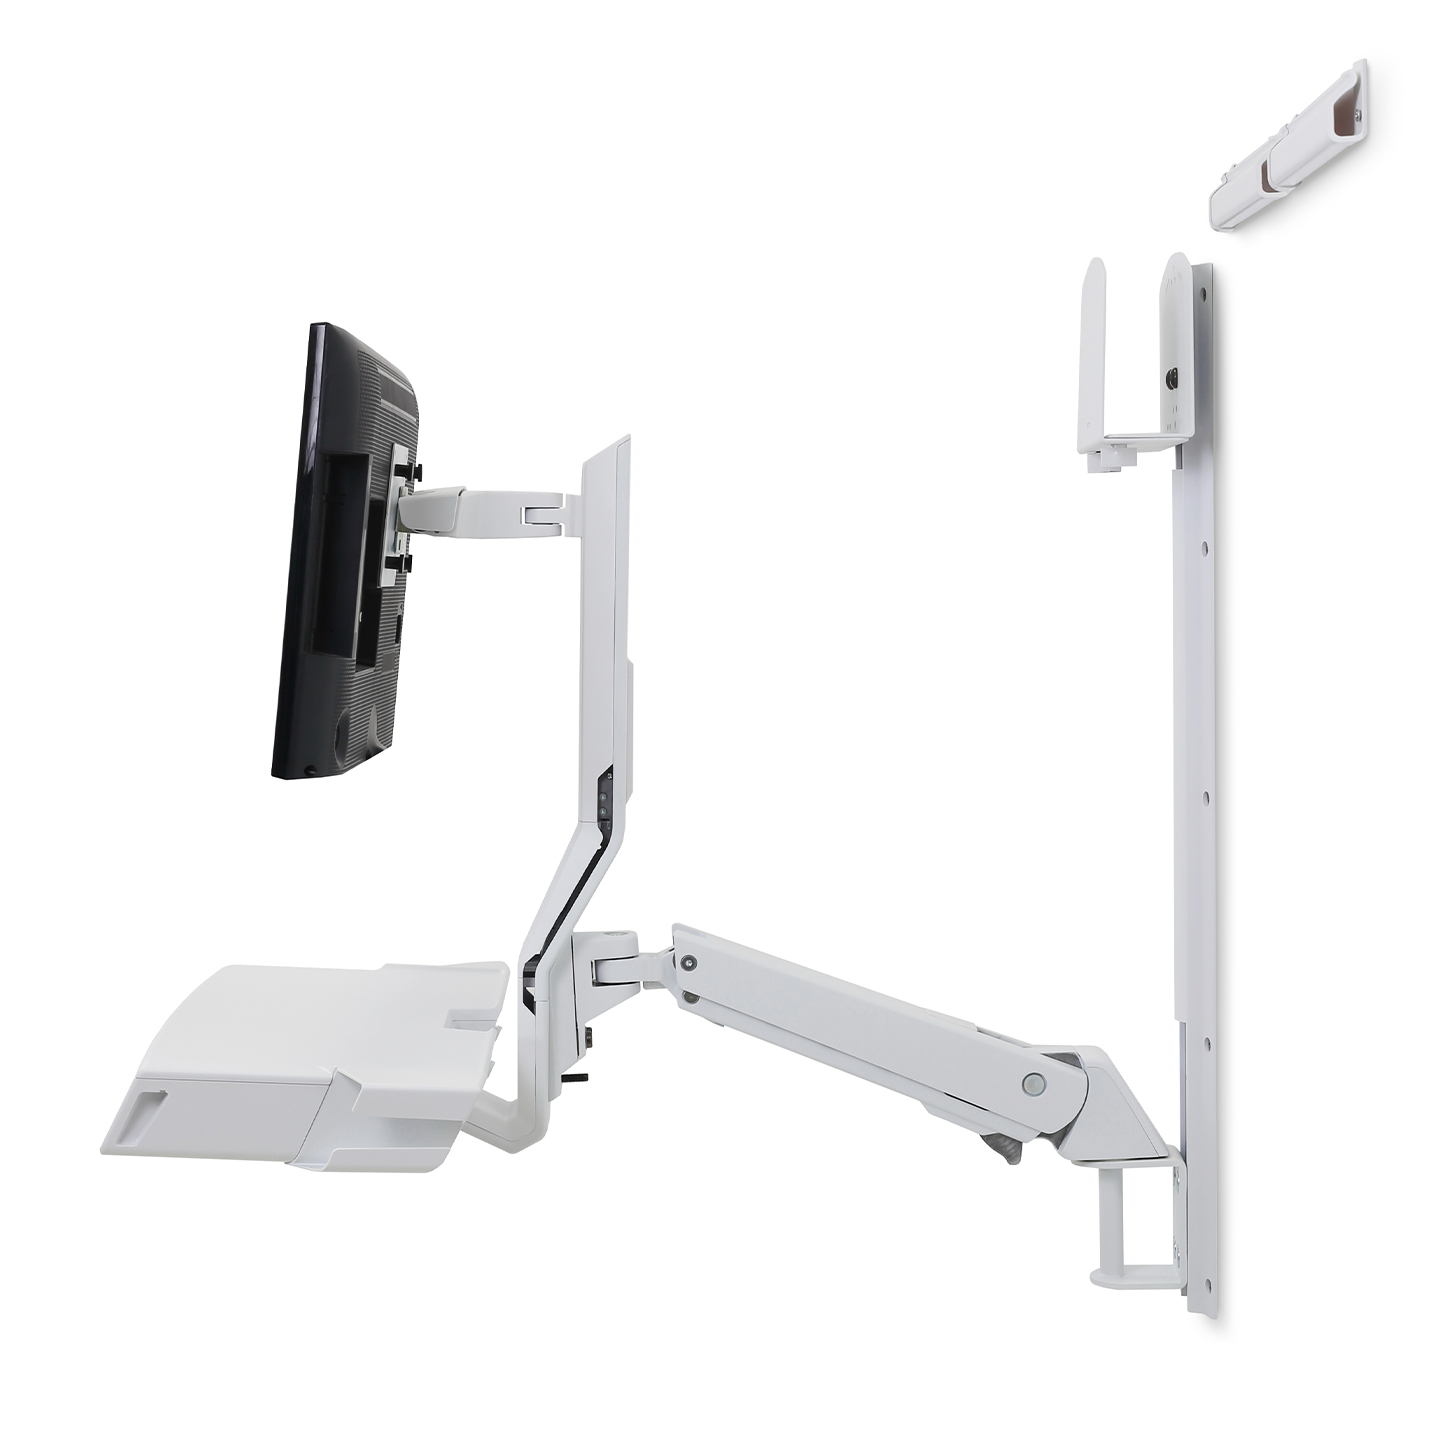 Haworth StyleView Sit to Stand Workspace with metal arms being extended in white